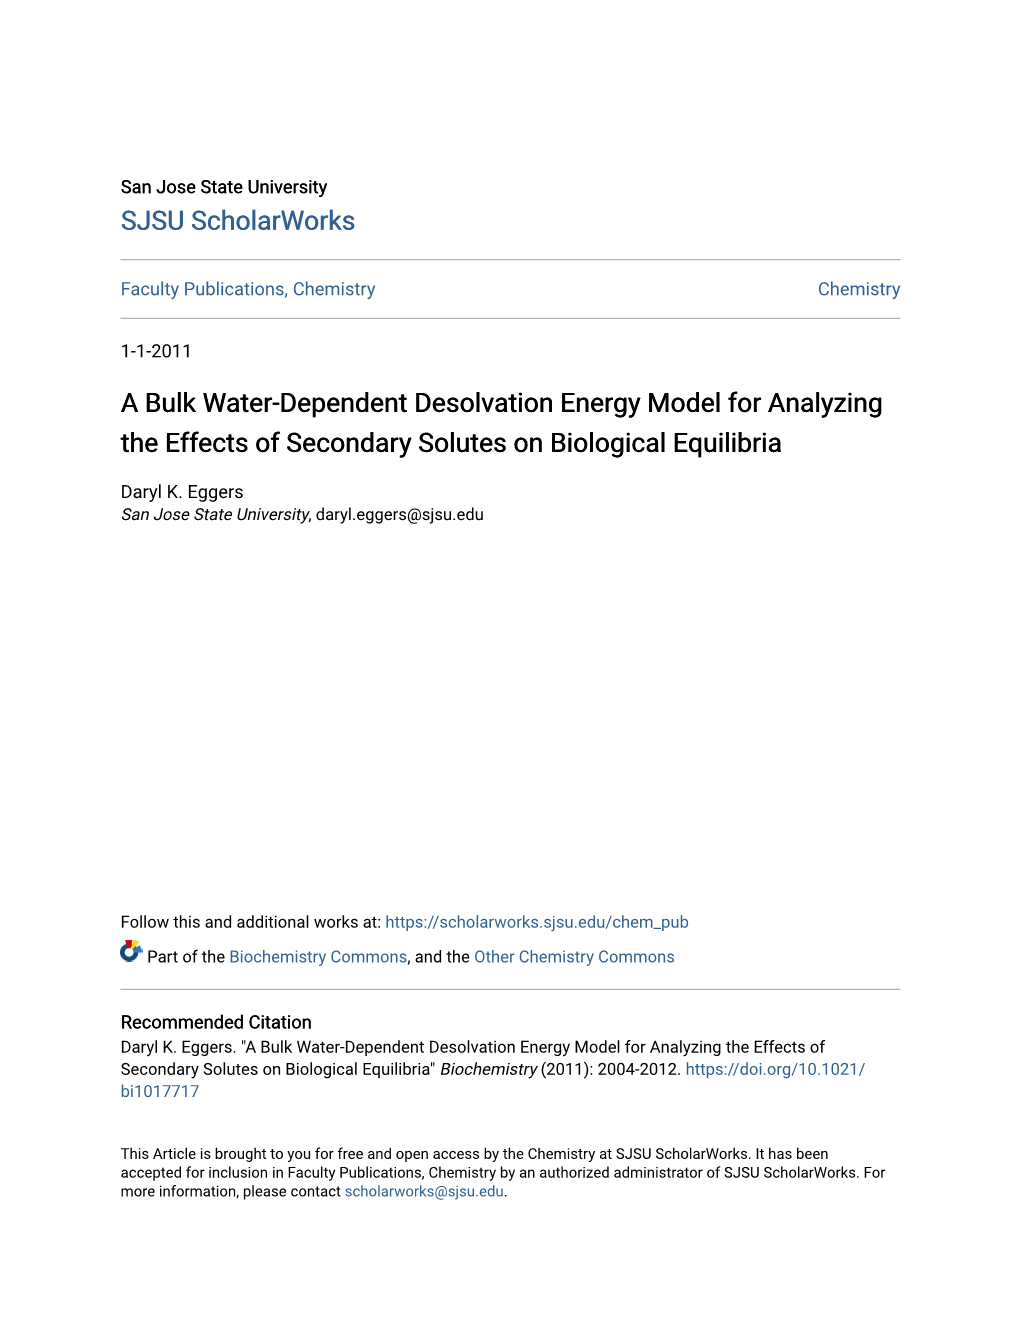 A Bulk Water-Dependent Desolvation Energy Model for Analyzing the Effects of Secondary Solutes on Biological Equilibria